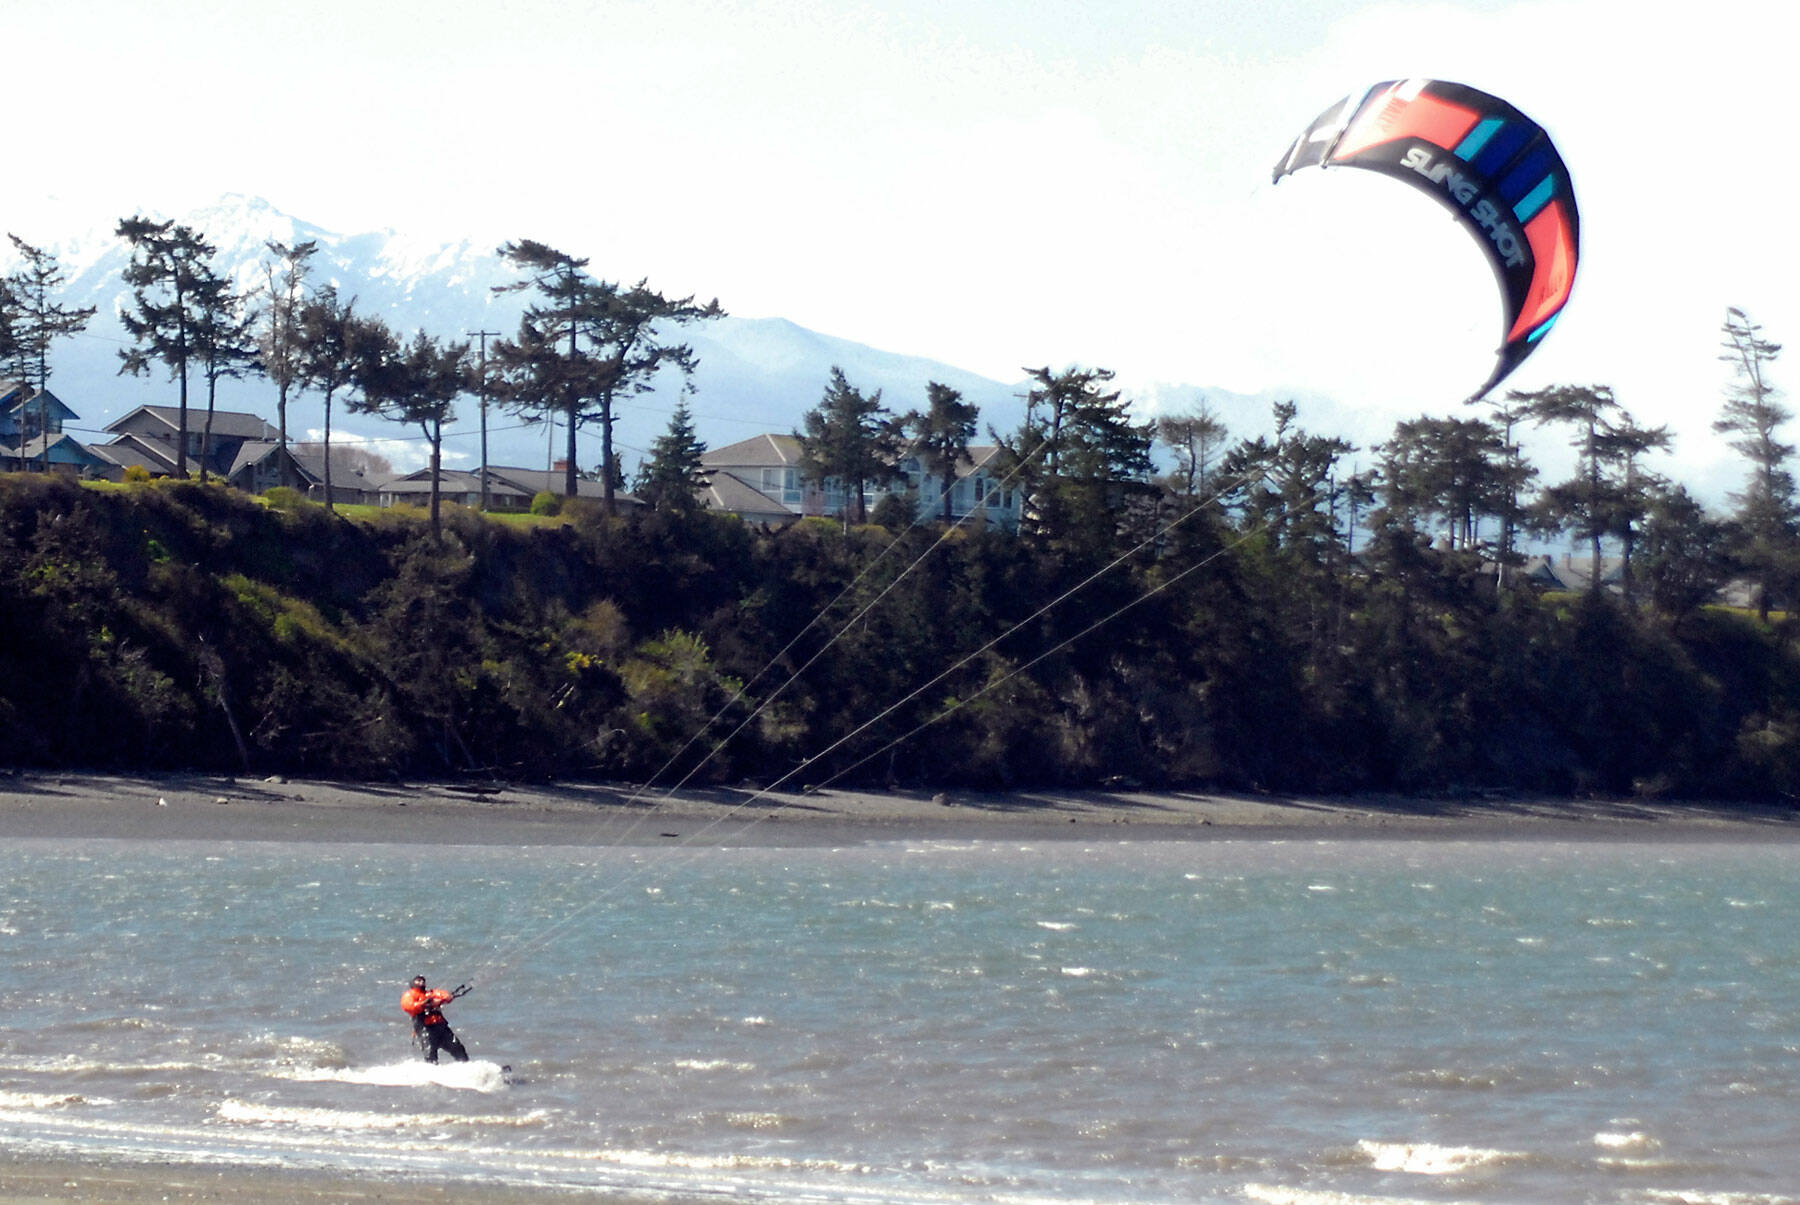 Barney Lund of Kent takes to the water off Dungeness Bay with his kite board on a blustery north of Sequim on April 5. Stiff westerly breezes prompted Lund to try his hand at harnessing the wind, he said. Photo by Keith Thorpe/Olympic Peninsula News Group